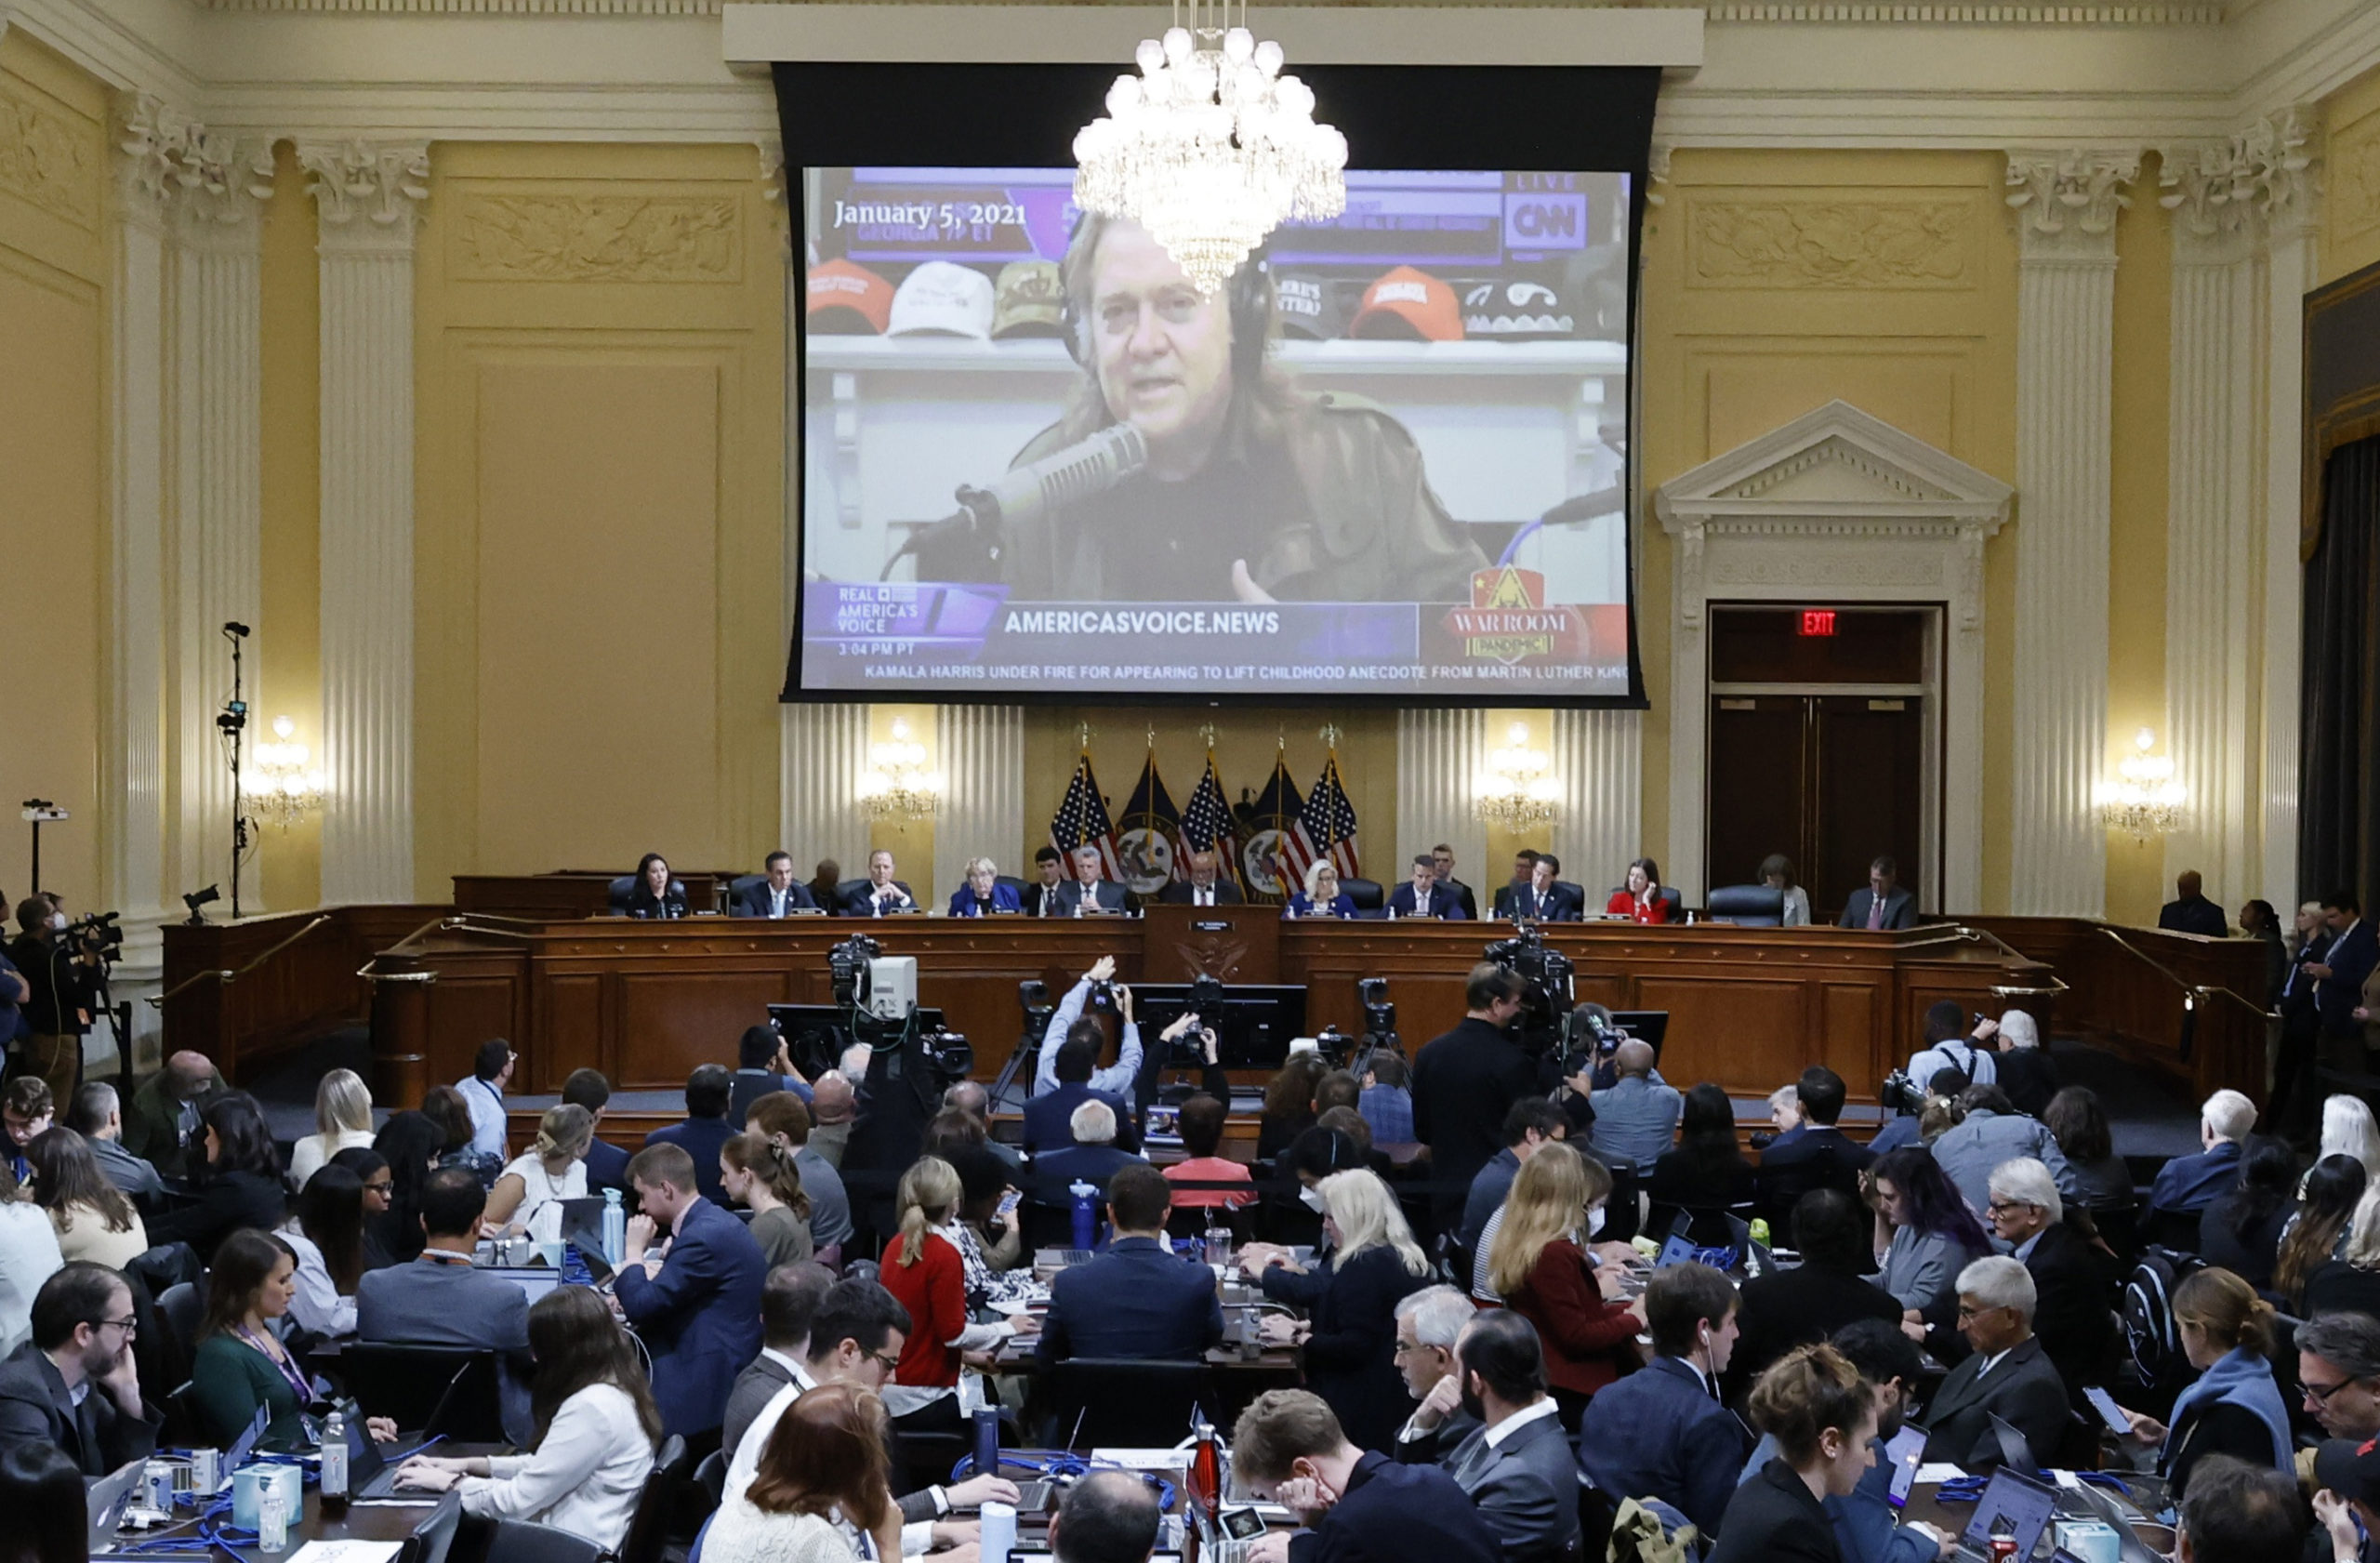 WASHINGTON, DC - OCTOBER 13: The U.S. House Select Committee to Investigate the January 6 Attack on the U.S. Capitol plays a video of former U.S. President Donald Trump's former White House political advisor Steve Bannon during a hearing on the January 6th investigation in the Cannon House Office Building on October 13, 2022 in Washington, DC. The bipartisan committee, in possibly its final hearing, has been gathering evidence for almost a year related to the January 6 attack at the U.S. Capitol.  On January 6, 2021, supporters of former President Donald Trump attacked the U.S. Capitol Building during an attempt to disrupt a congressional vote to confirm the electoral college win for President Joe Biden. (Photo by Jonathan Ernst-Pool/Getty Images)